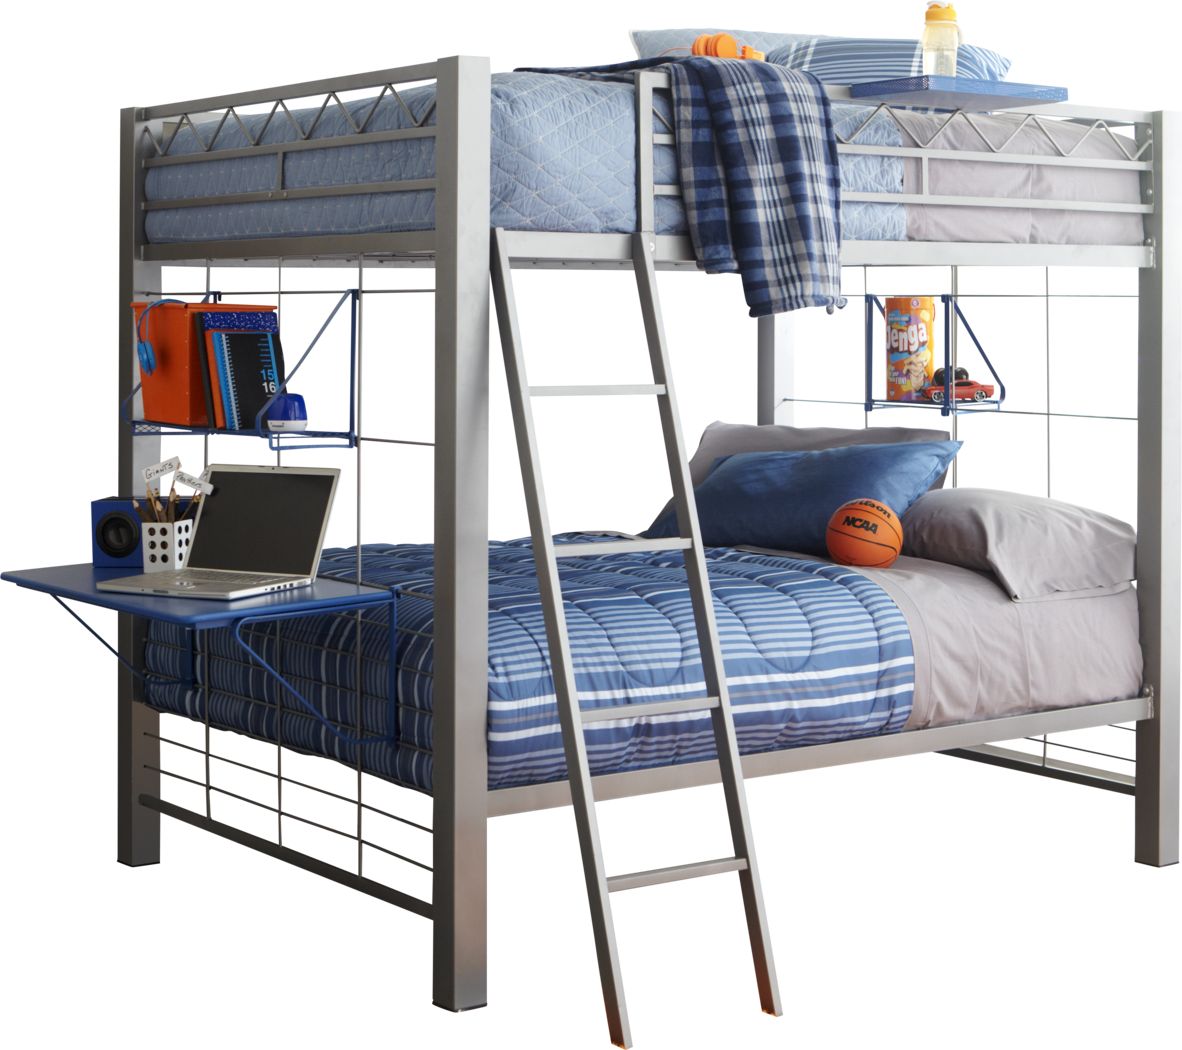 Rooms To Go Triple Bunk Beds New Daily, Rooms To Go Childrens Bunk Beds